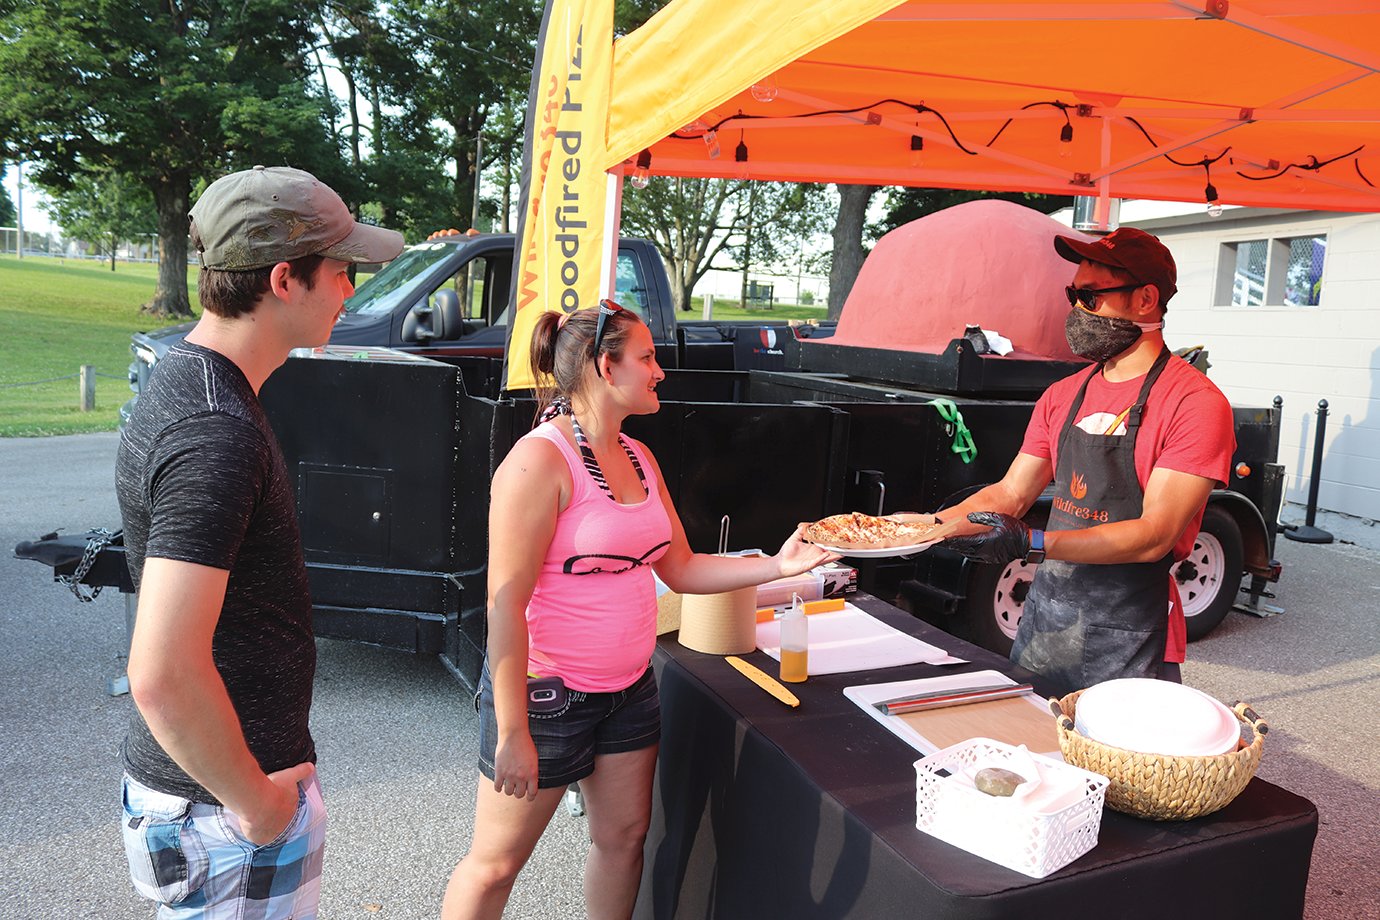 Waveland’s David Cotten, left, and Laura Lee Noel have their order filled by Wildfire 348’s Zach Green on Saturday at Milligan Park, which saw a fraction of attendants compared to previous years for Fourth of July celebrations.